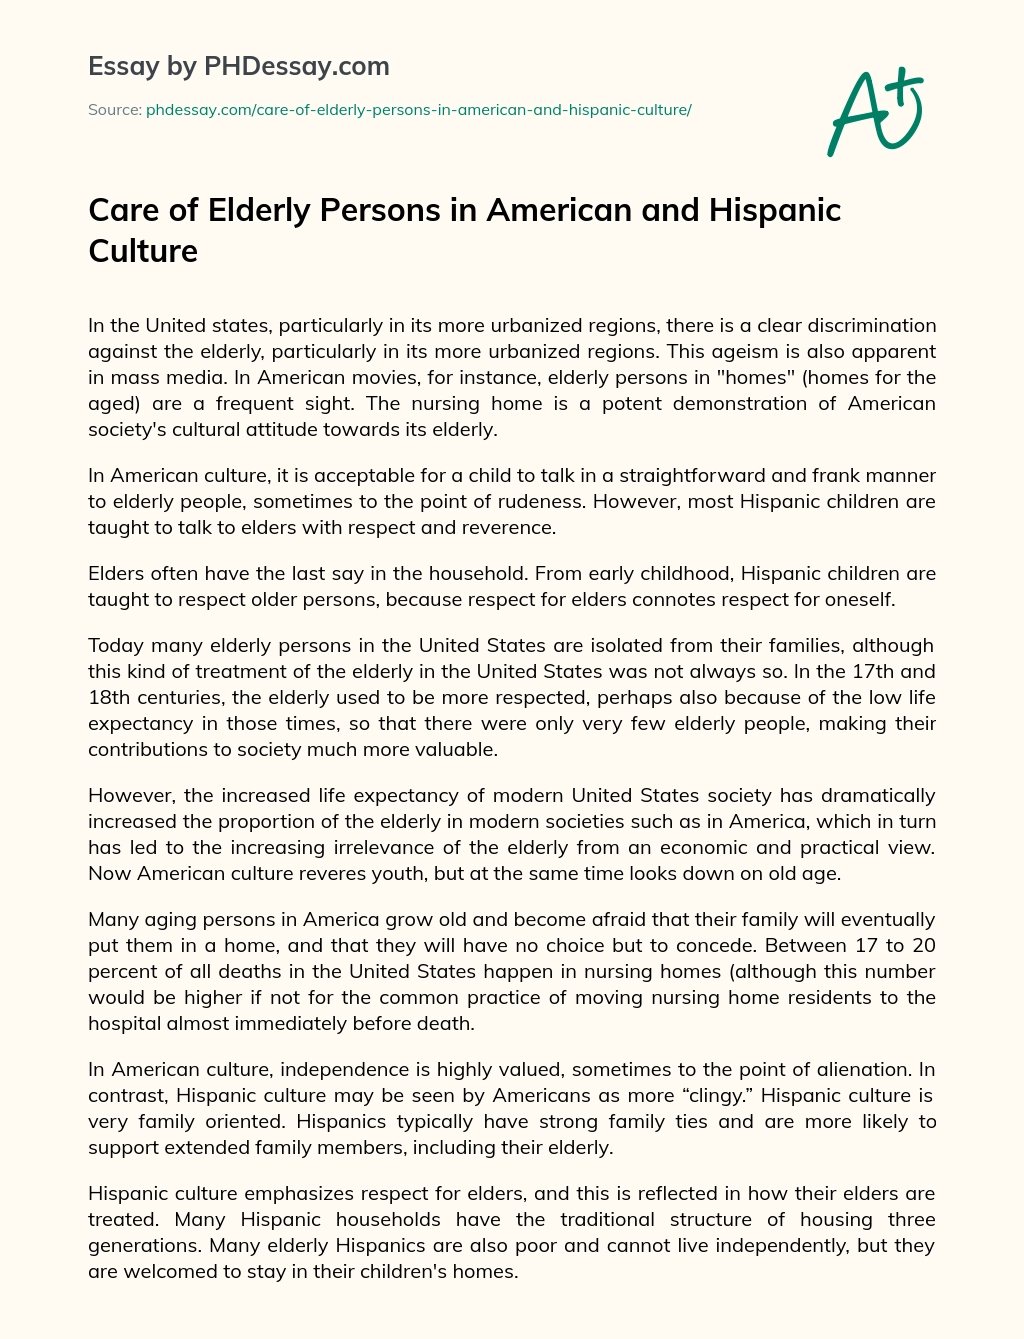 Care of Elderly Persons in American and Hispanic Culture essay